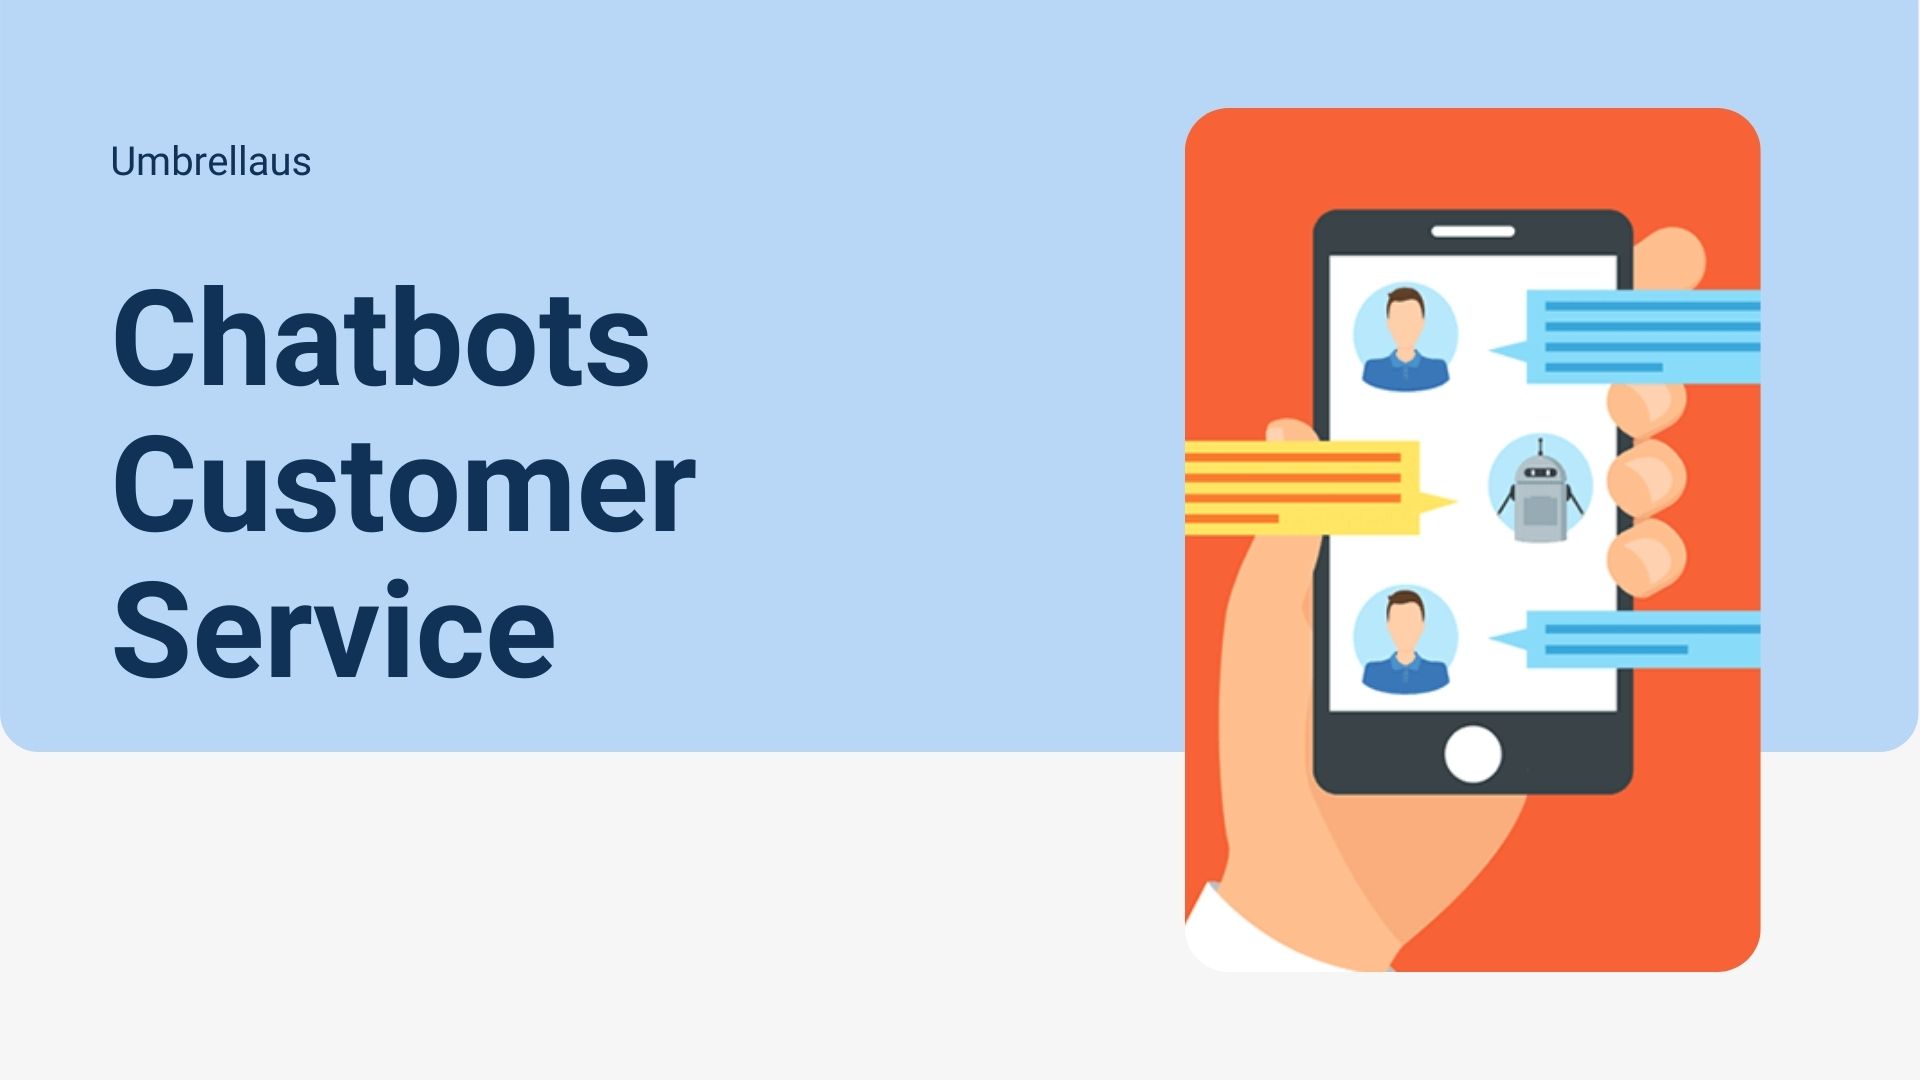 The Complete Guide to Website Chat Marketing and AI Chatbots